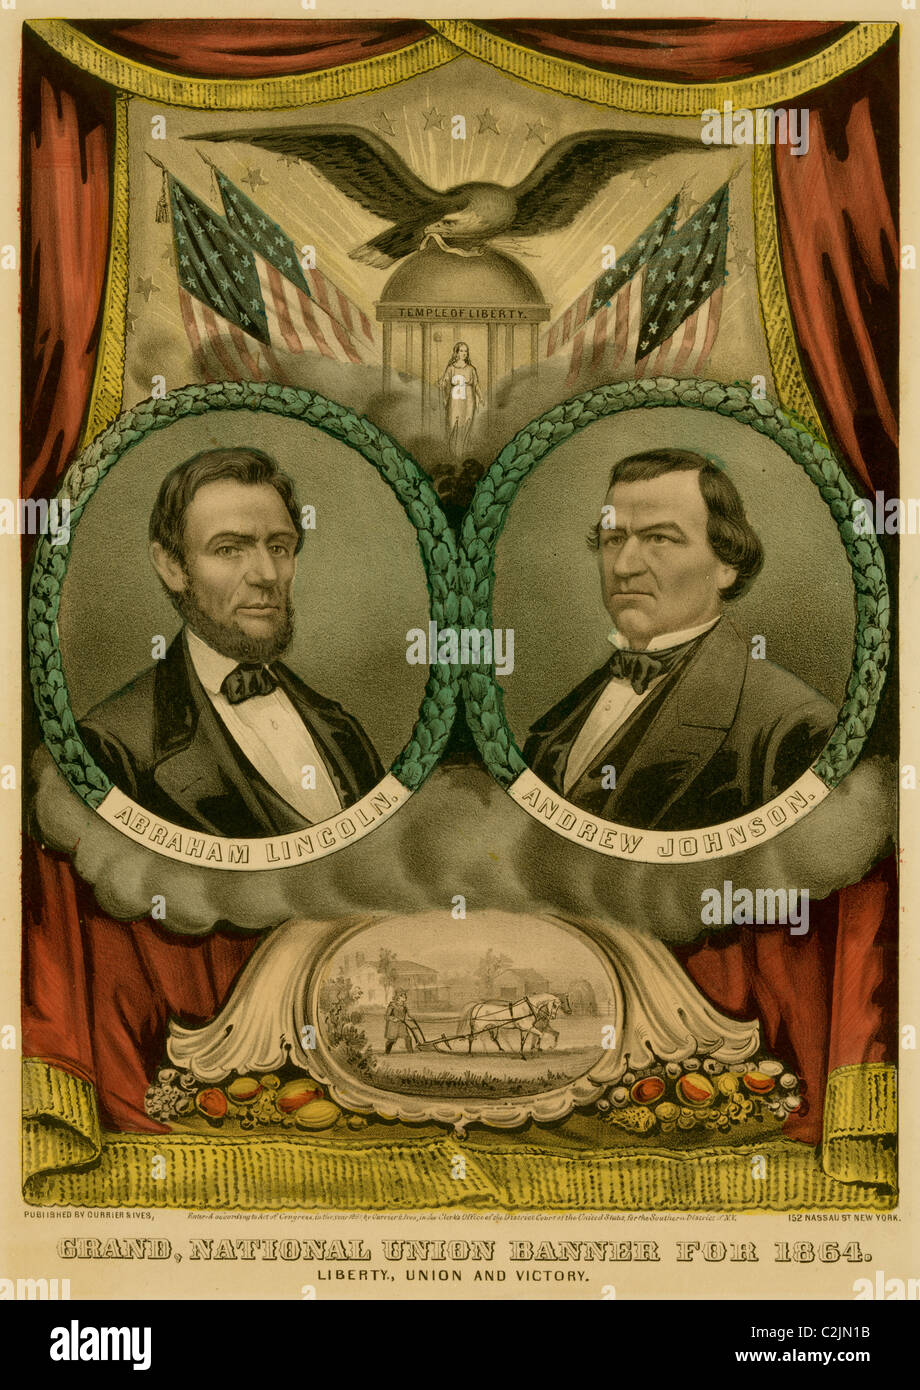 Grand national union banner for 1864. Liberty, union and victory Stock Photo